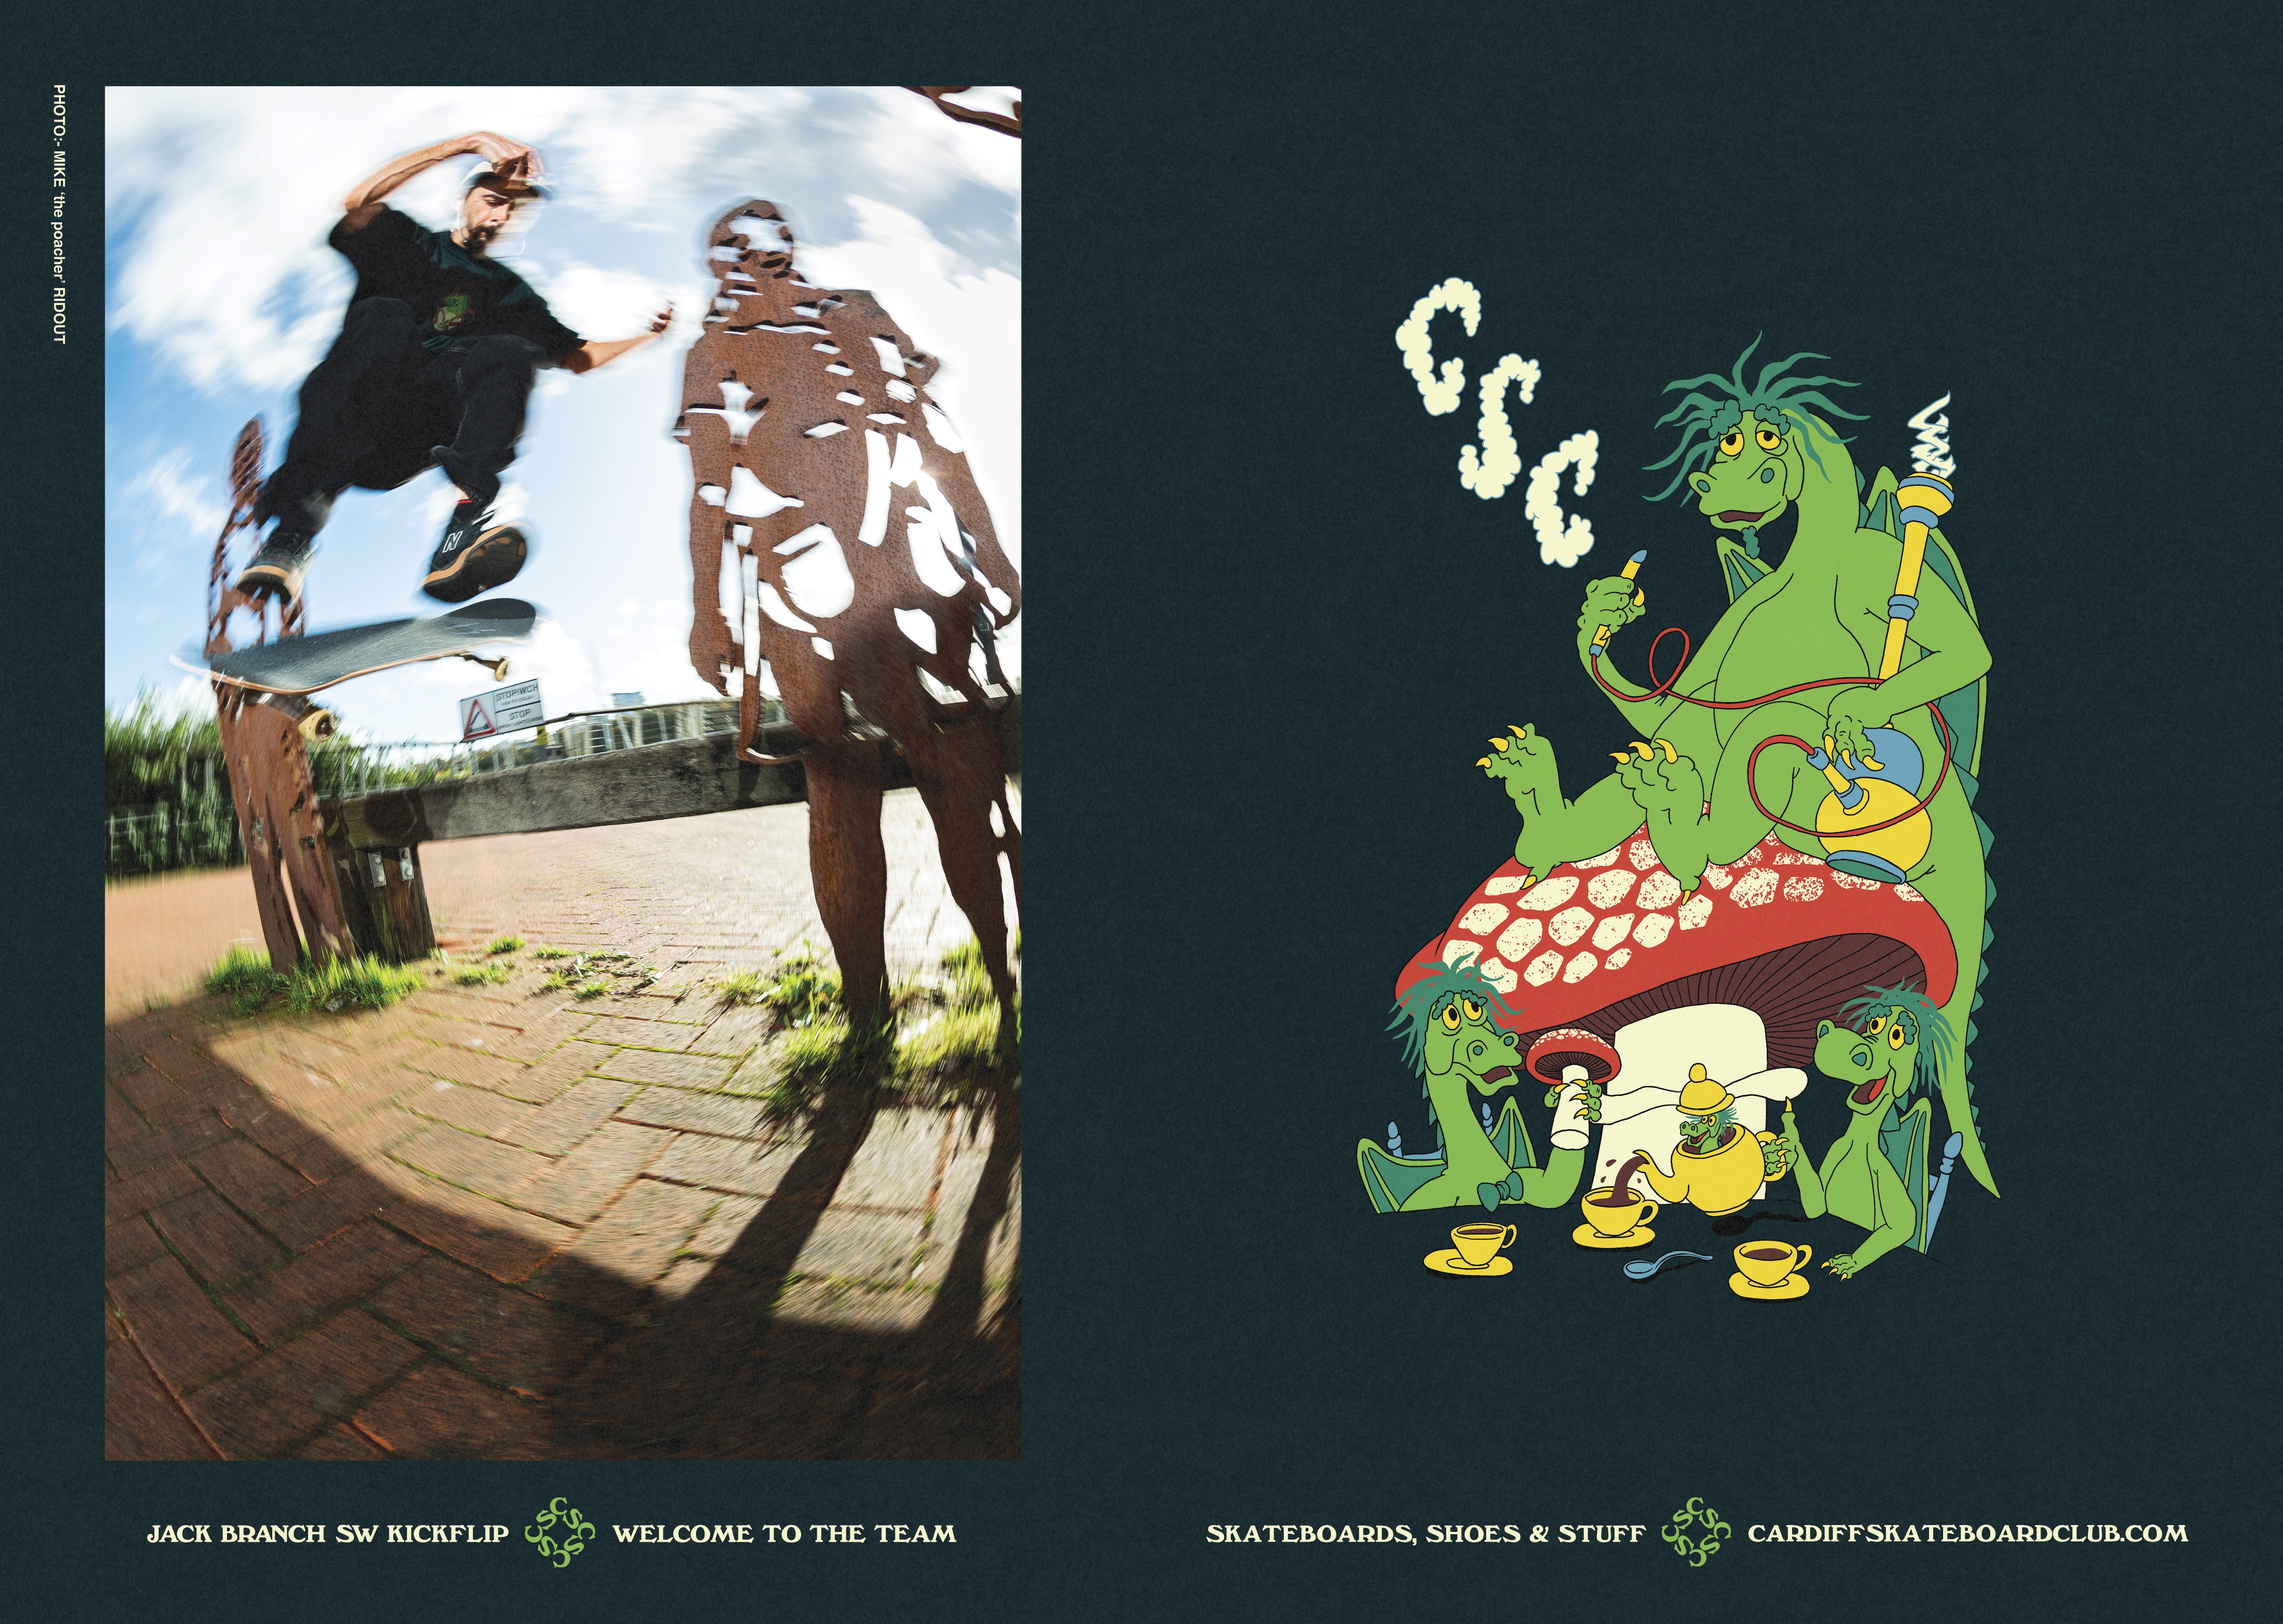 Jack Branch CSC Welcome Ad from The Skateboarder's Companion, photo by Mike Ridout and artwork by Nathaniel Jones - CSC, Cardiff Skateboard Club - UK Skate Shop